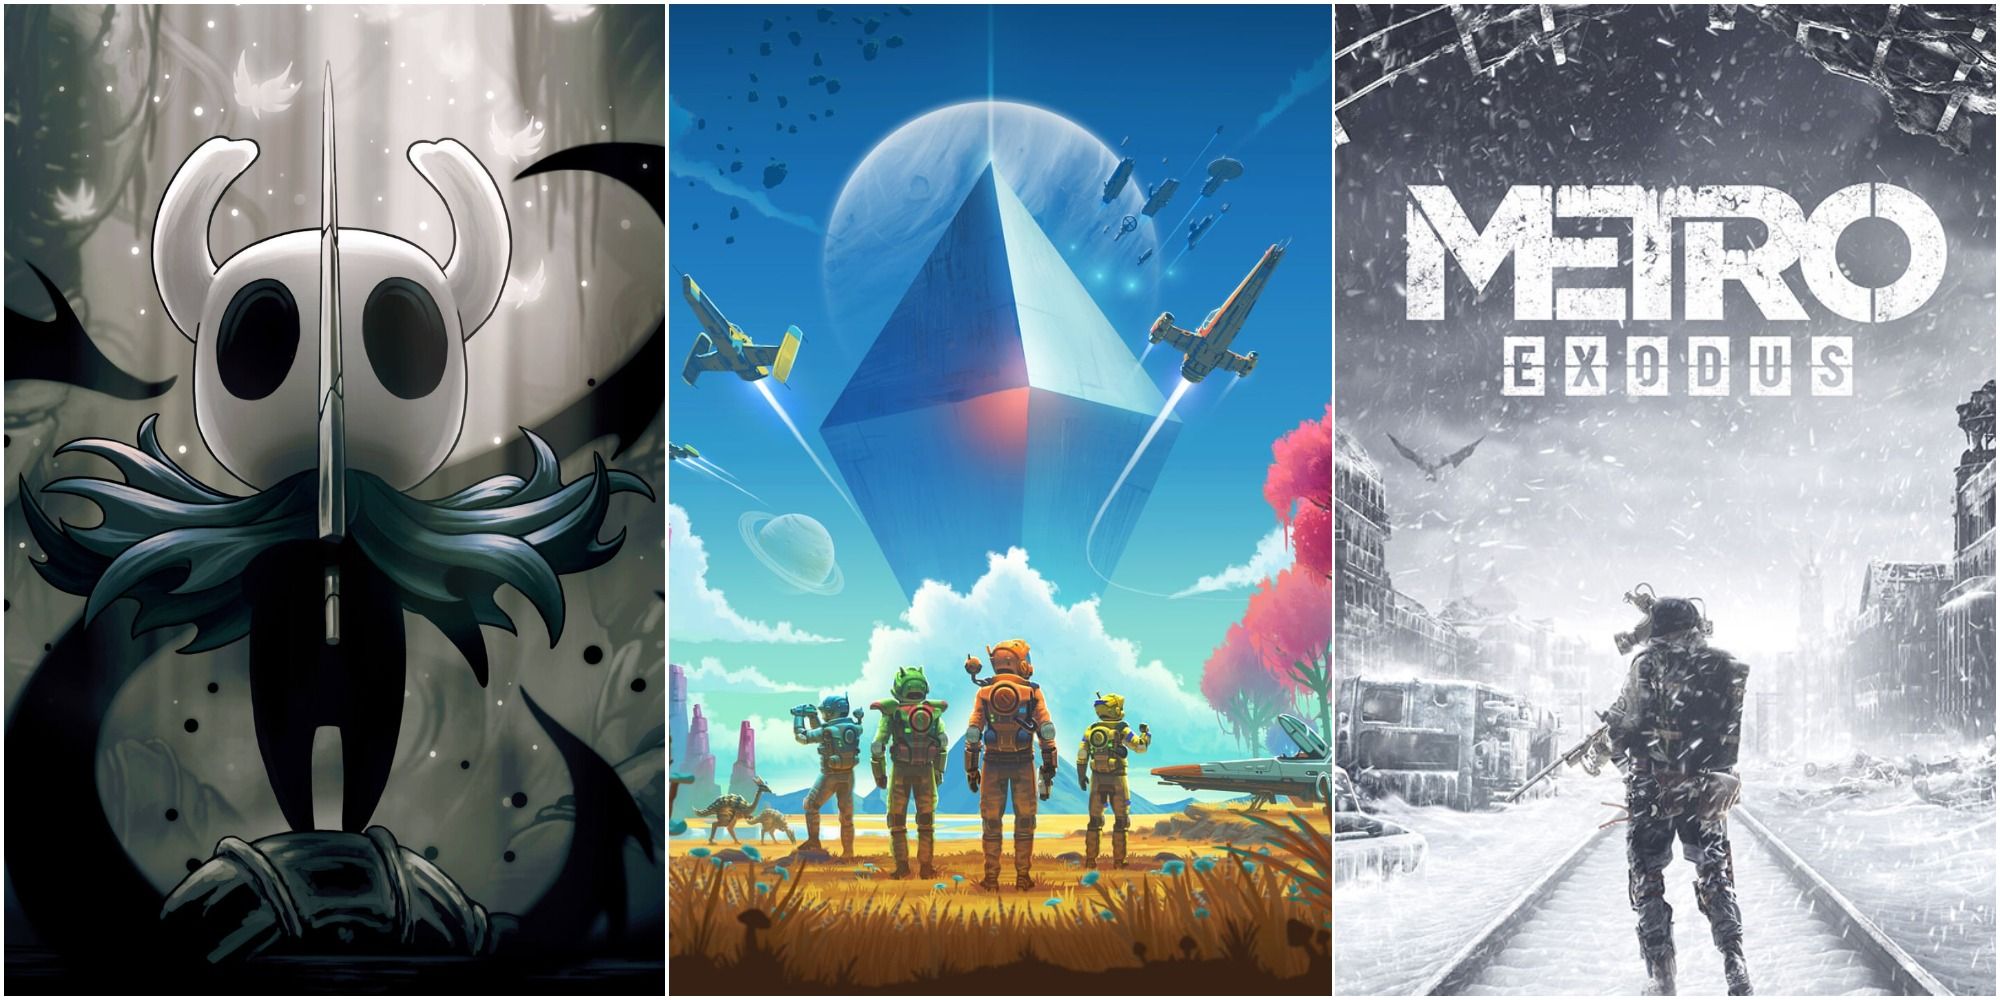 Key art of the Knight from Hollow Knight holding their nail, promo art for No Man's Sky featuring many characters, and the cover art for Metro Exodus of Artyom standing in snow